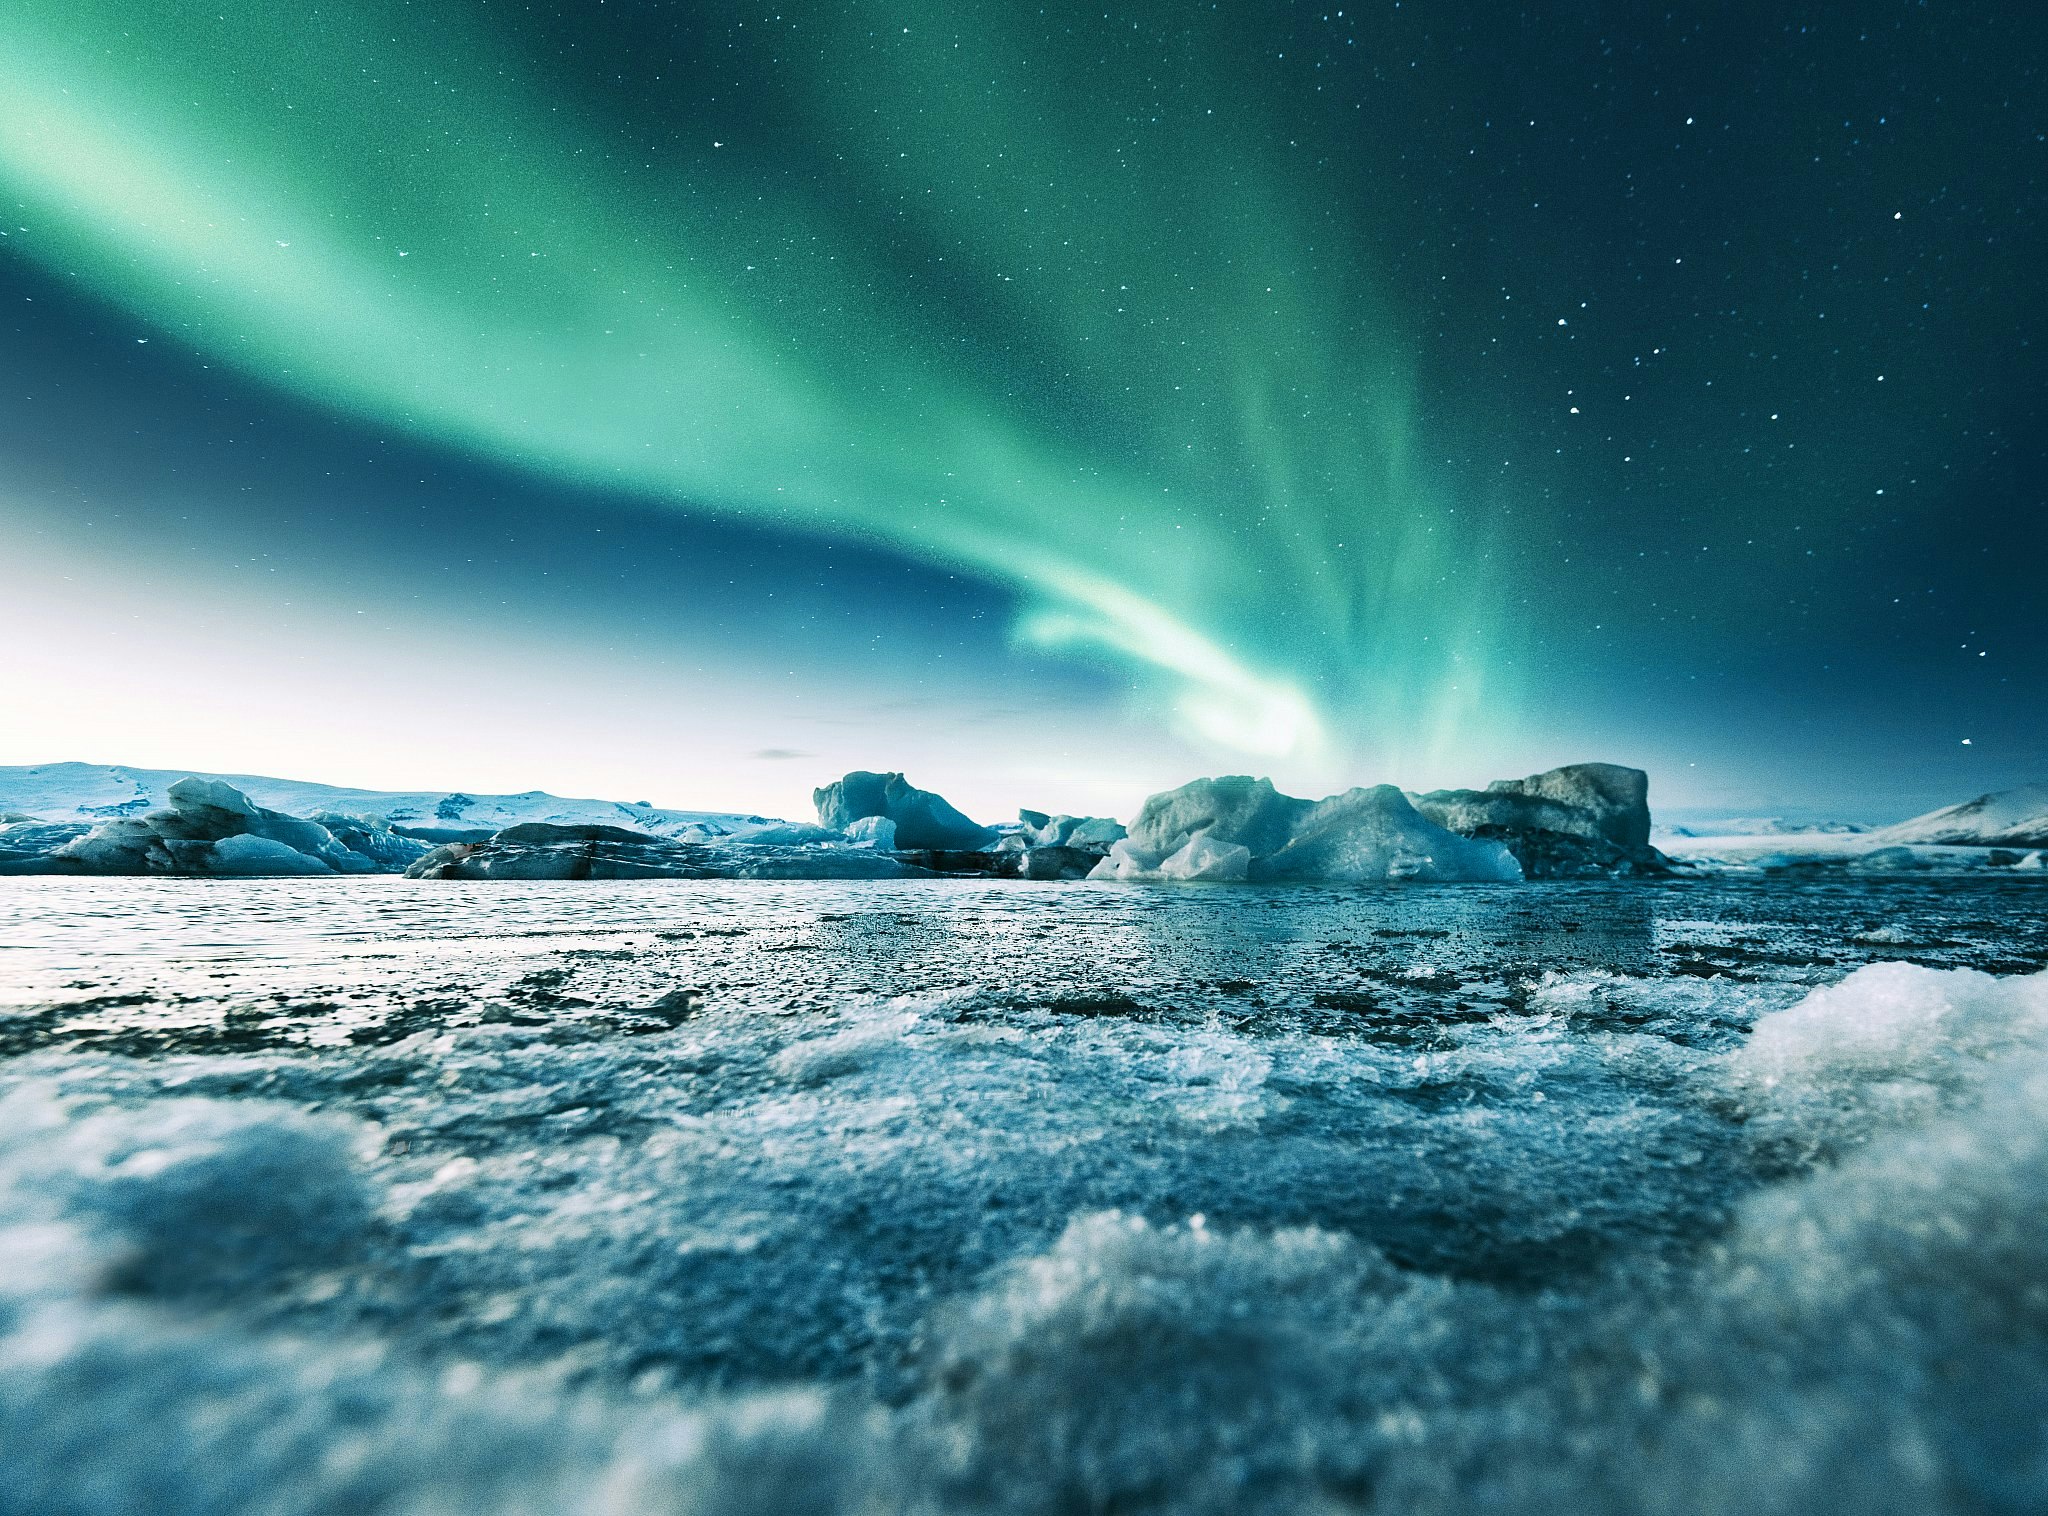 The shimmering green lights of the aurora borealis above a large icy glacial lake.